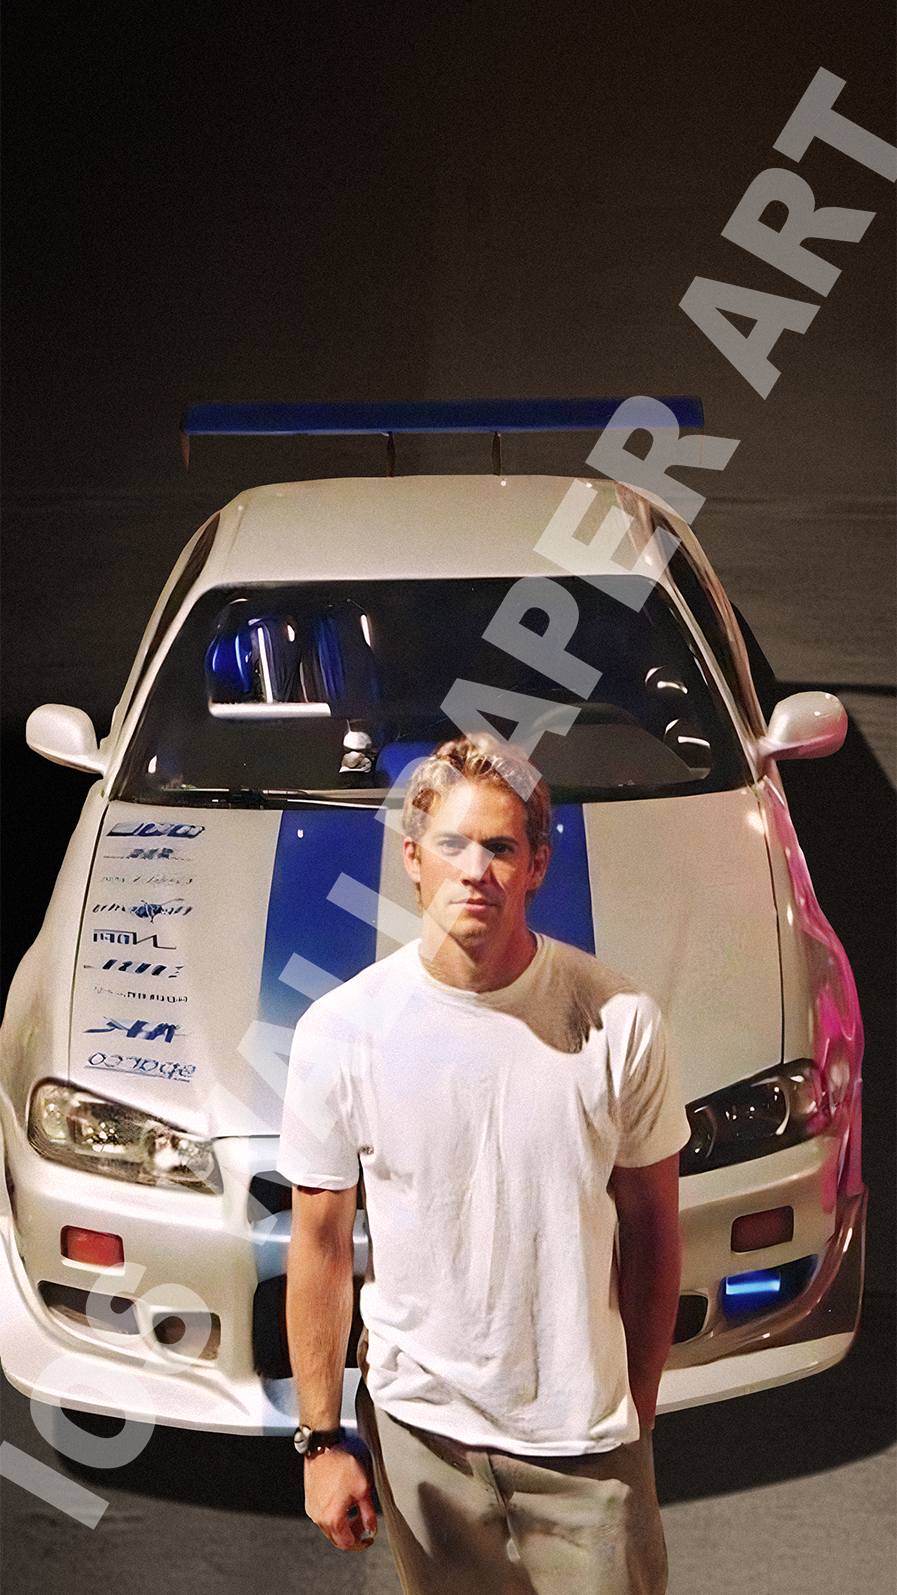 2 Fast 2 Furious - Paul Walker / Fast and the Furious | Digital Download